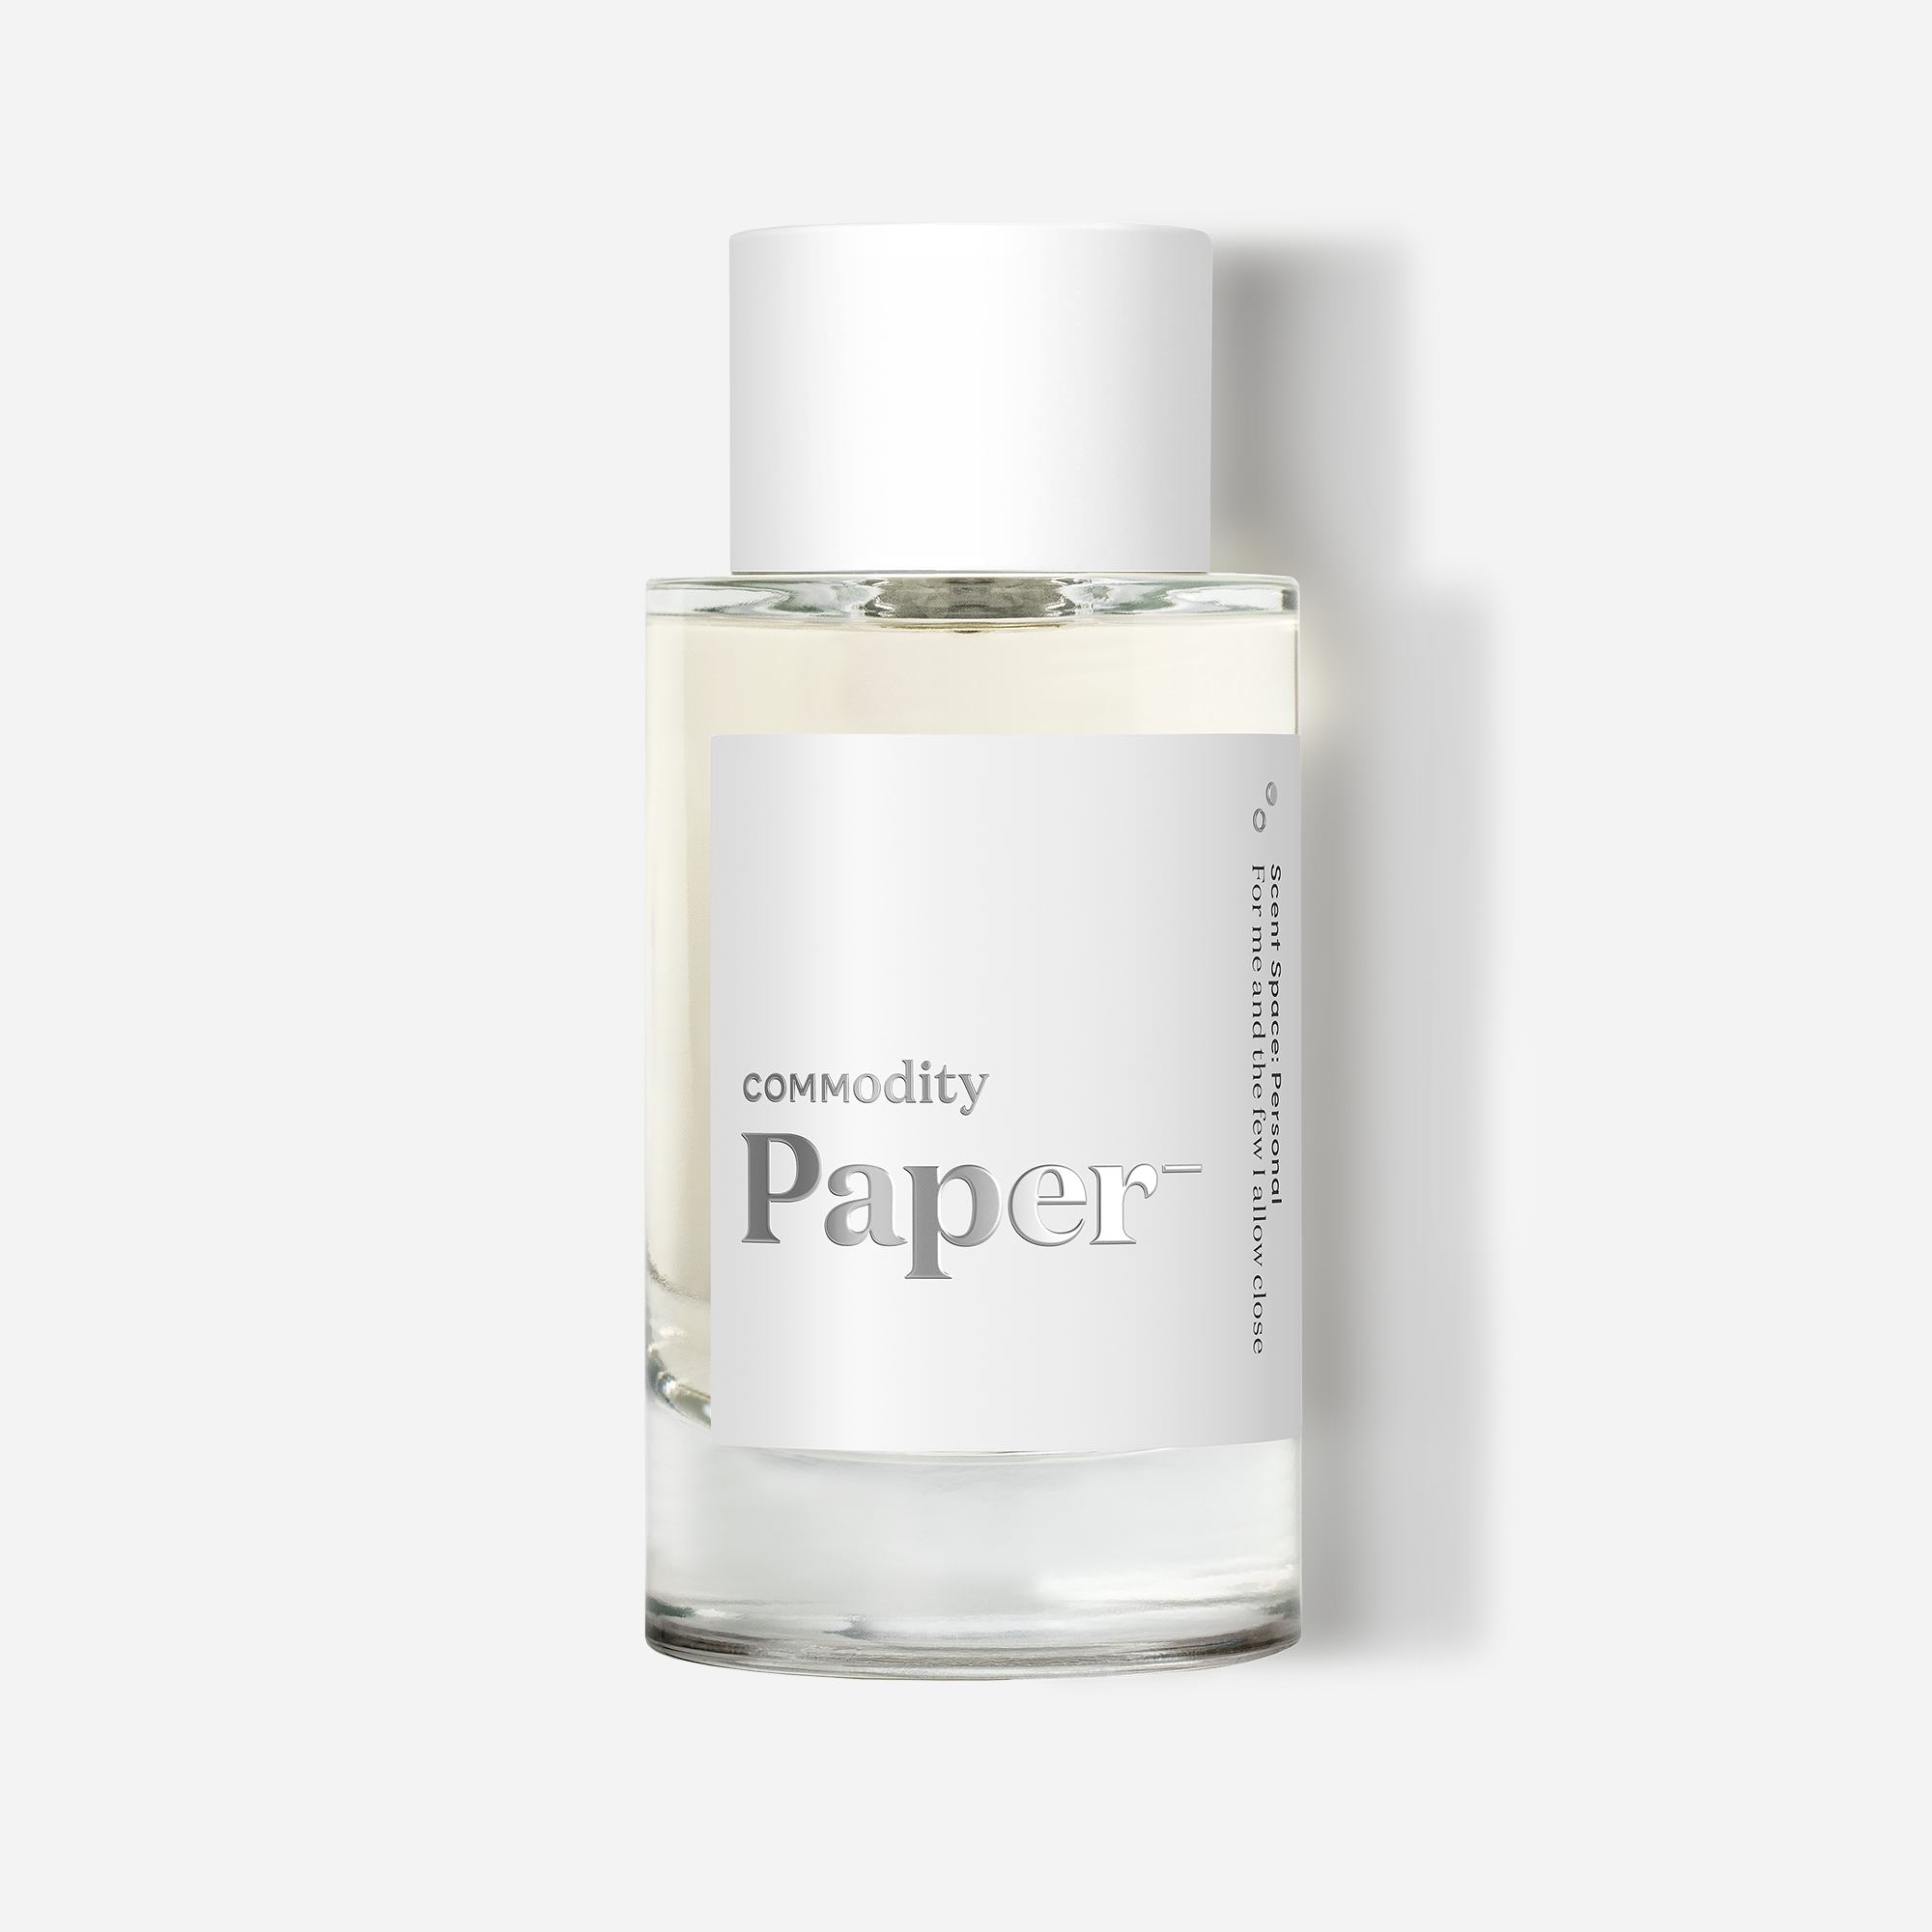 Commodity Paper- Personal 3.4 oz / 100 ml